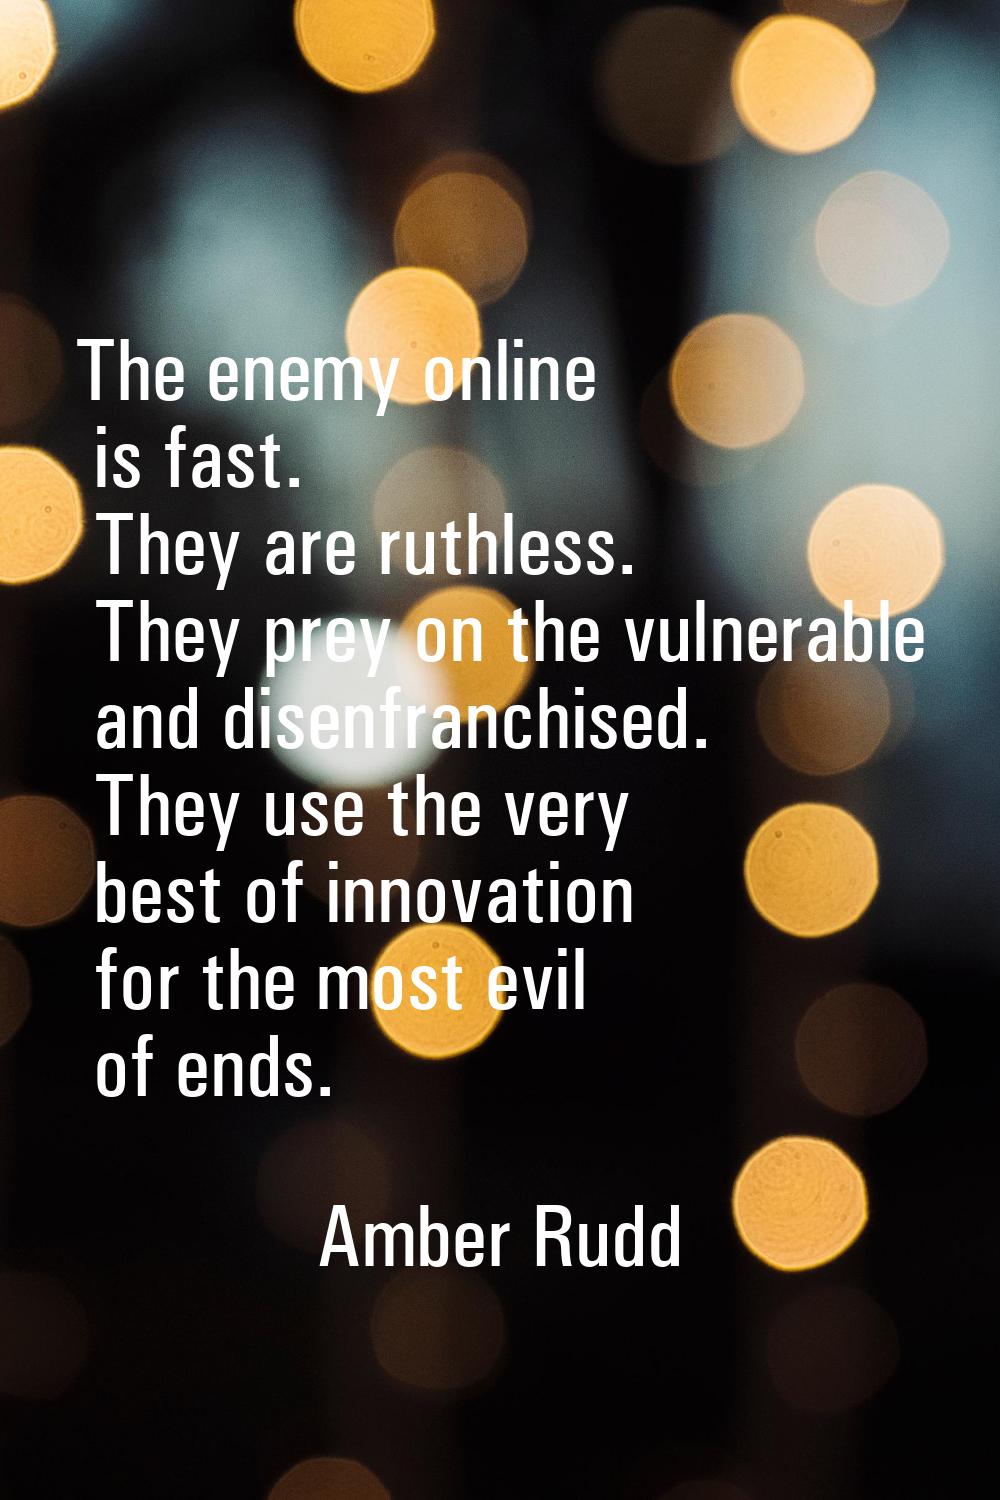 The enemy online is fast. They are ruthless. They prey on the vulnerable and disenfranchised. They 